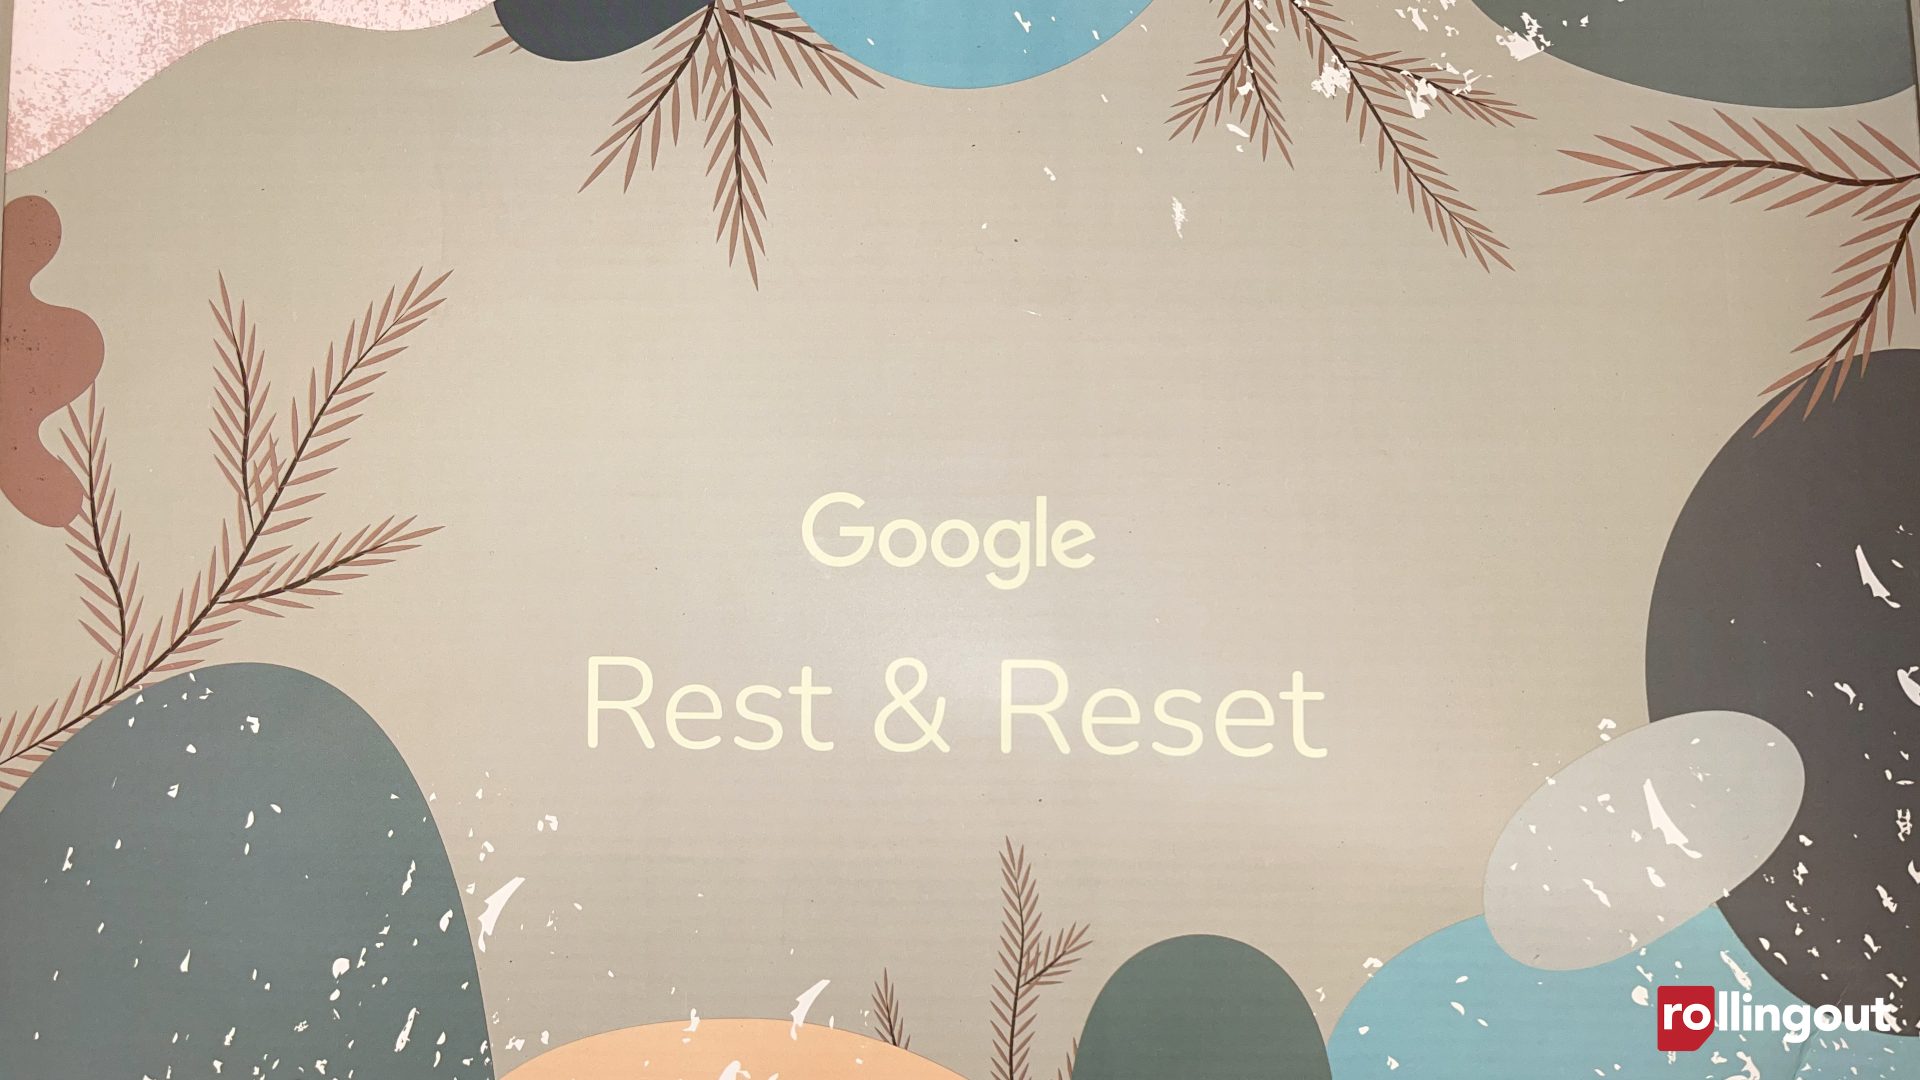 The Google Rest & Reset kit. (Photo credit: Rashad Milligan for rolling out)